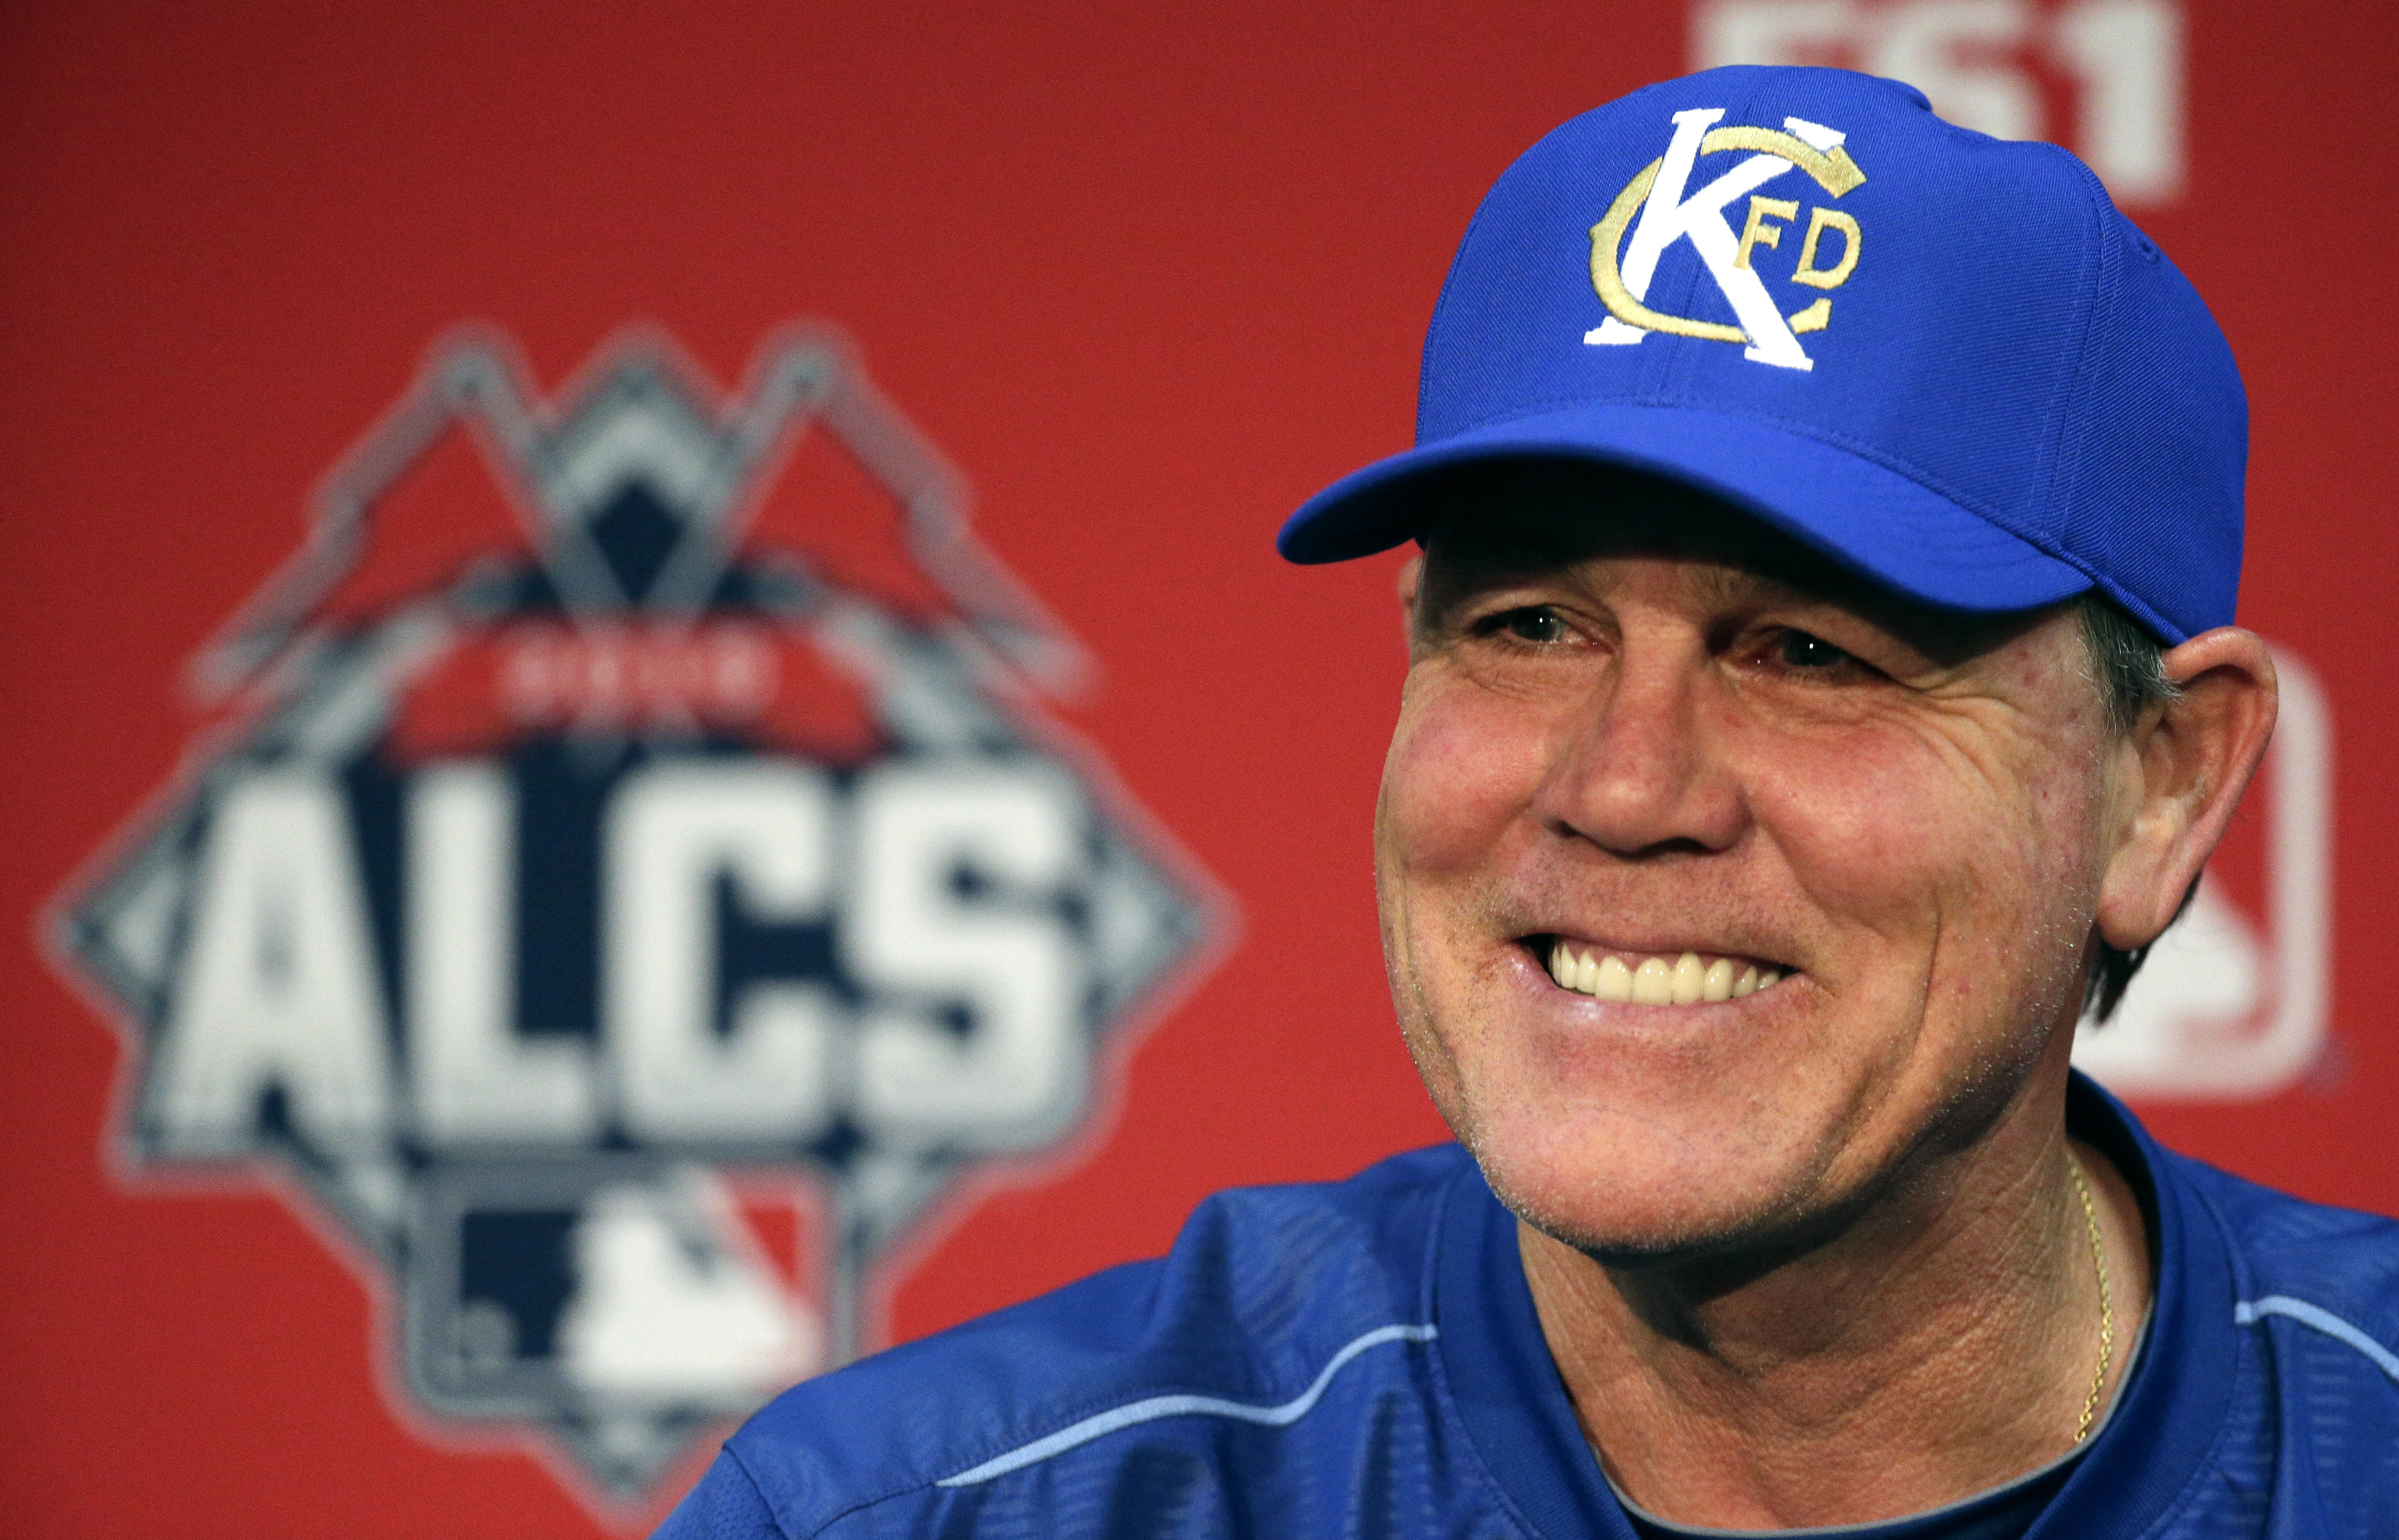 The Story of the 2015 Kansas City Royals: Part 9 - 2015 World